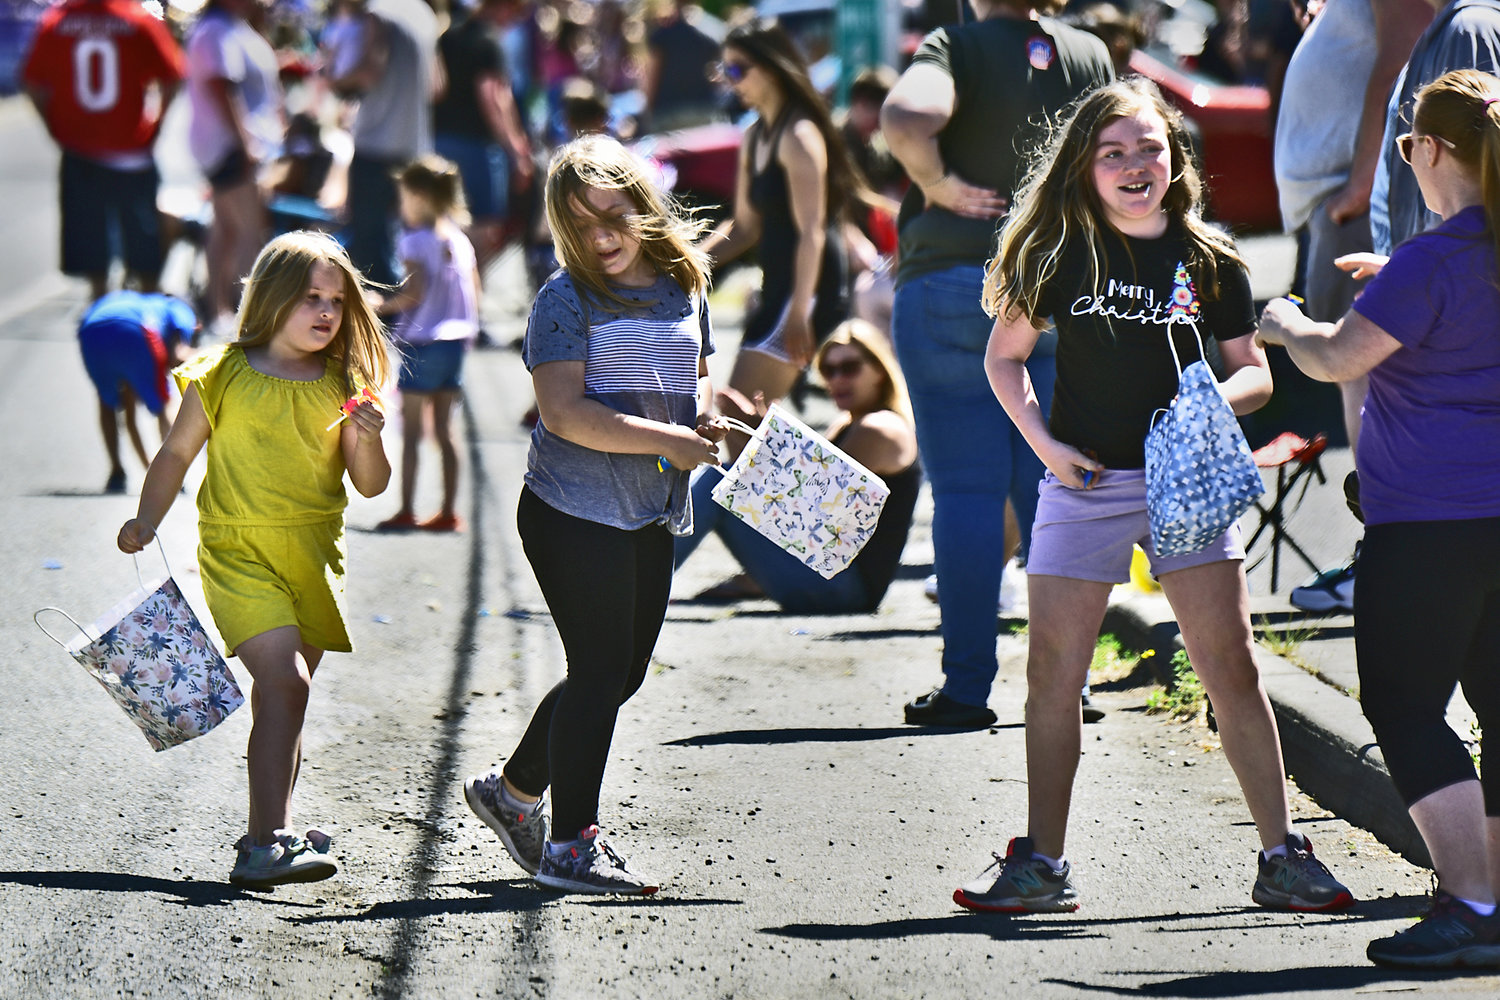 Kids scramble for candy thrown their way during the Swede Day parade on Saturday, June 19, in Rochester.